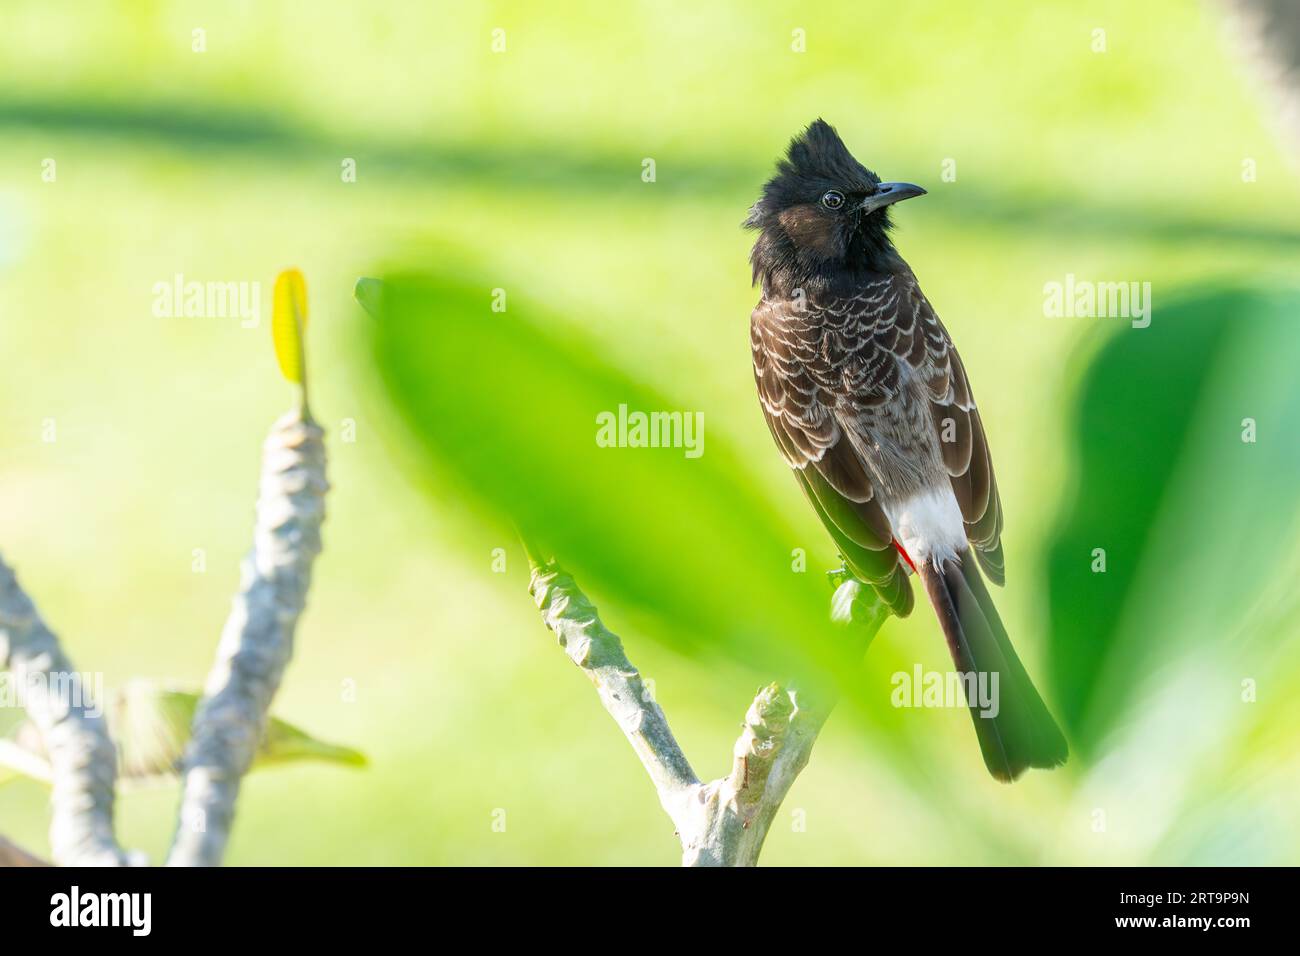 Red vented bulbul perched facing away with head turned right against green background. Stock Photo